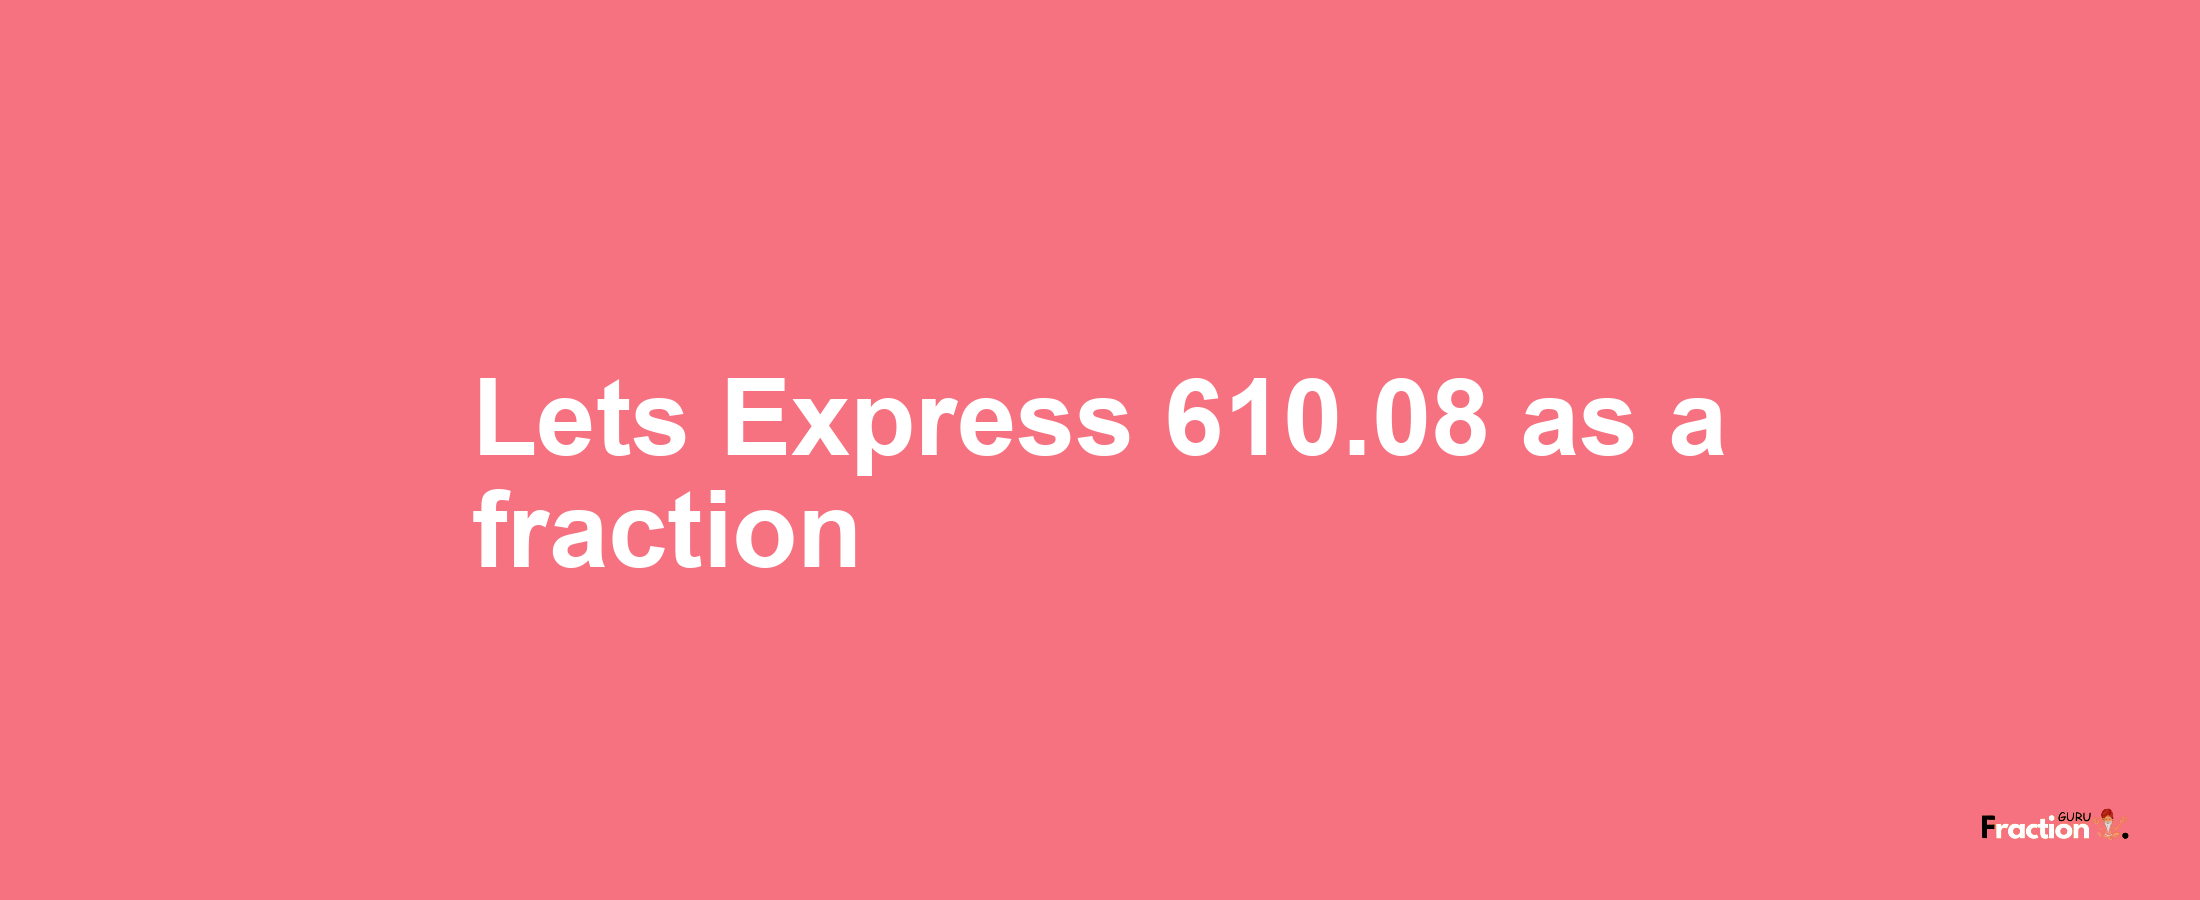 Lets Express 610.08 as afraction